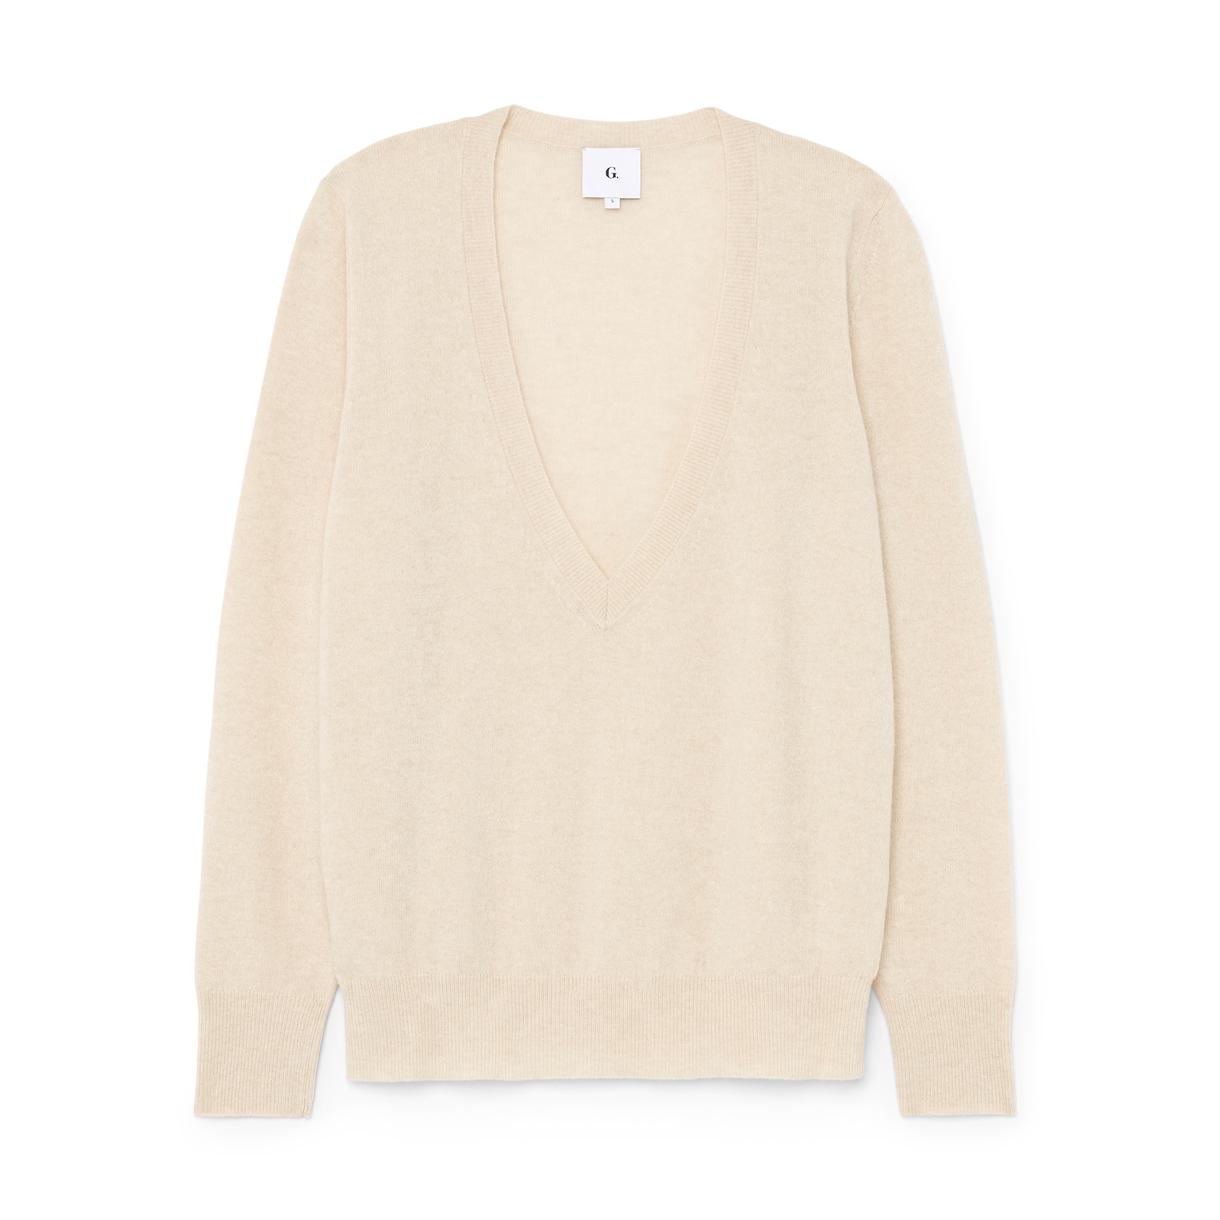 G. Label by goop Lilian V-Neck Sweater